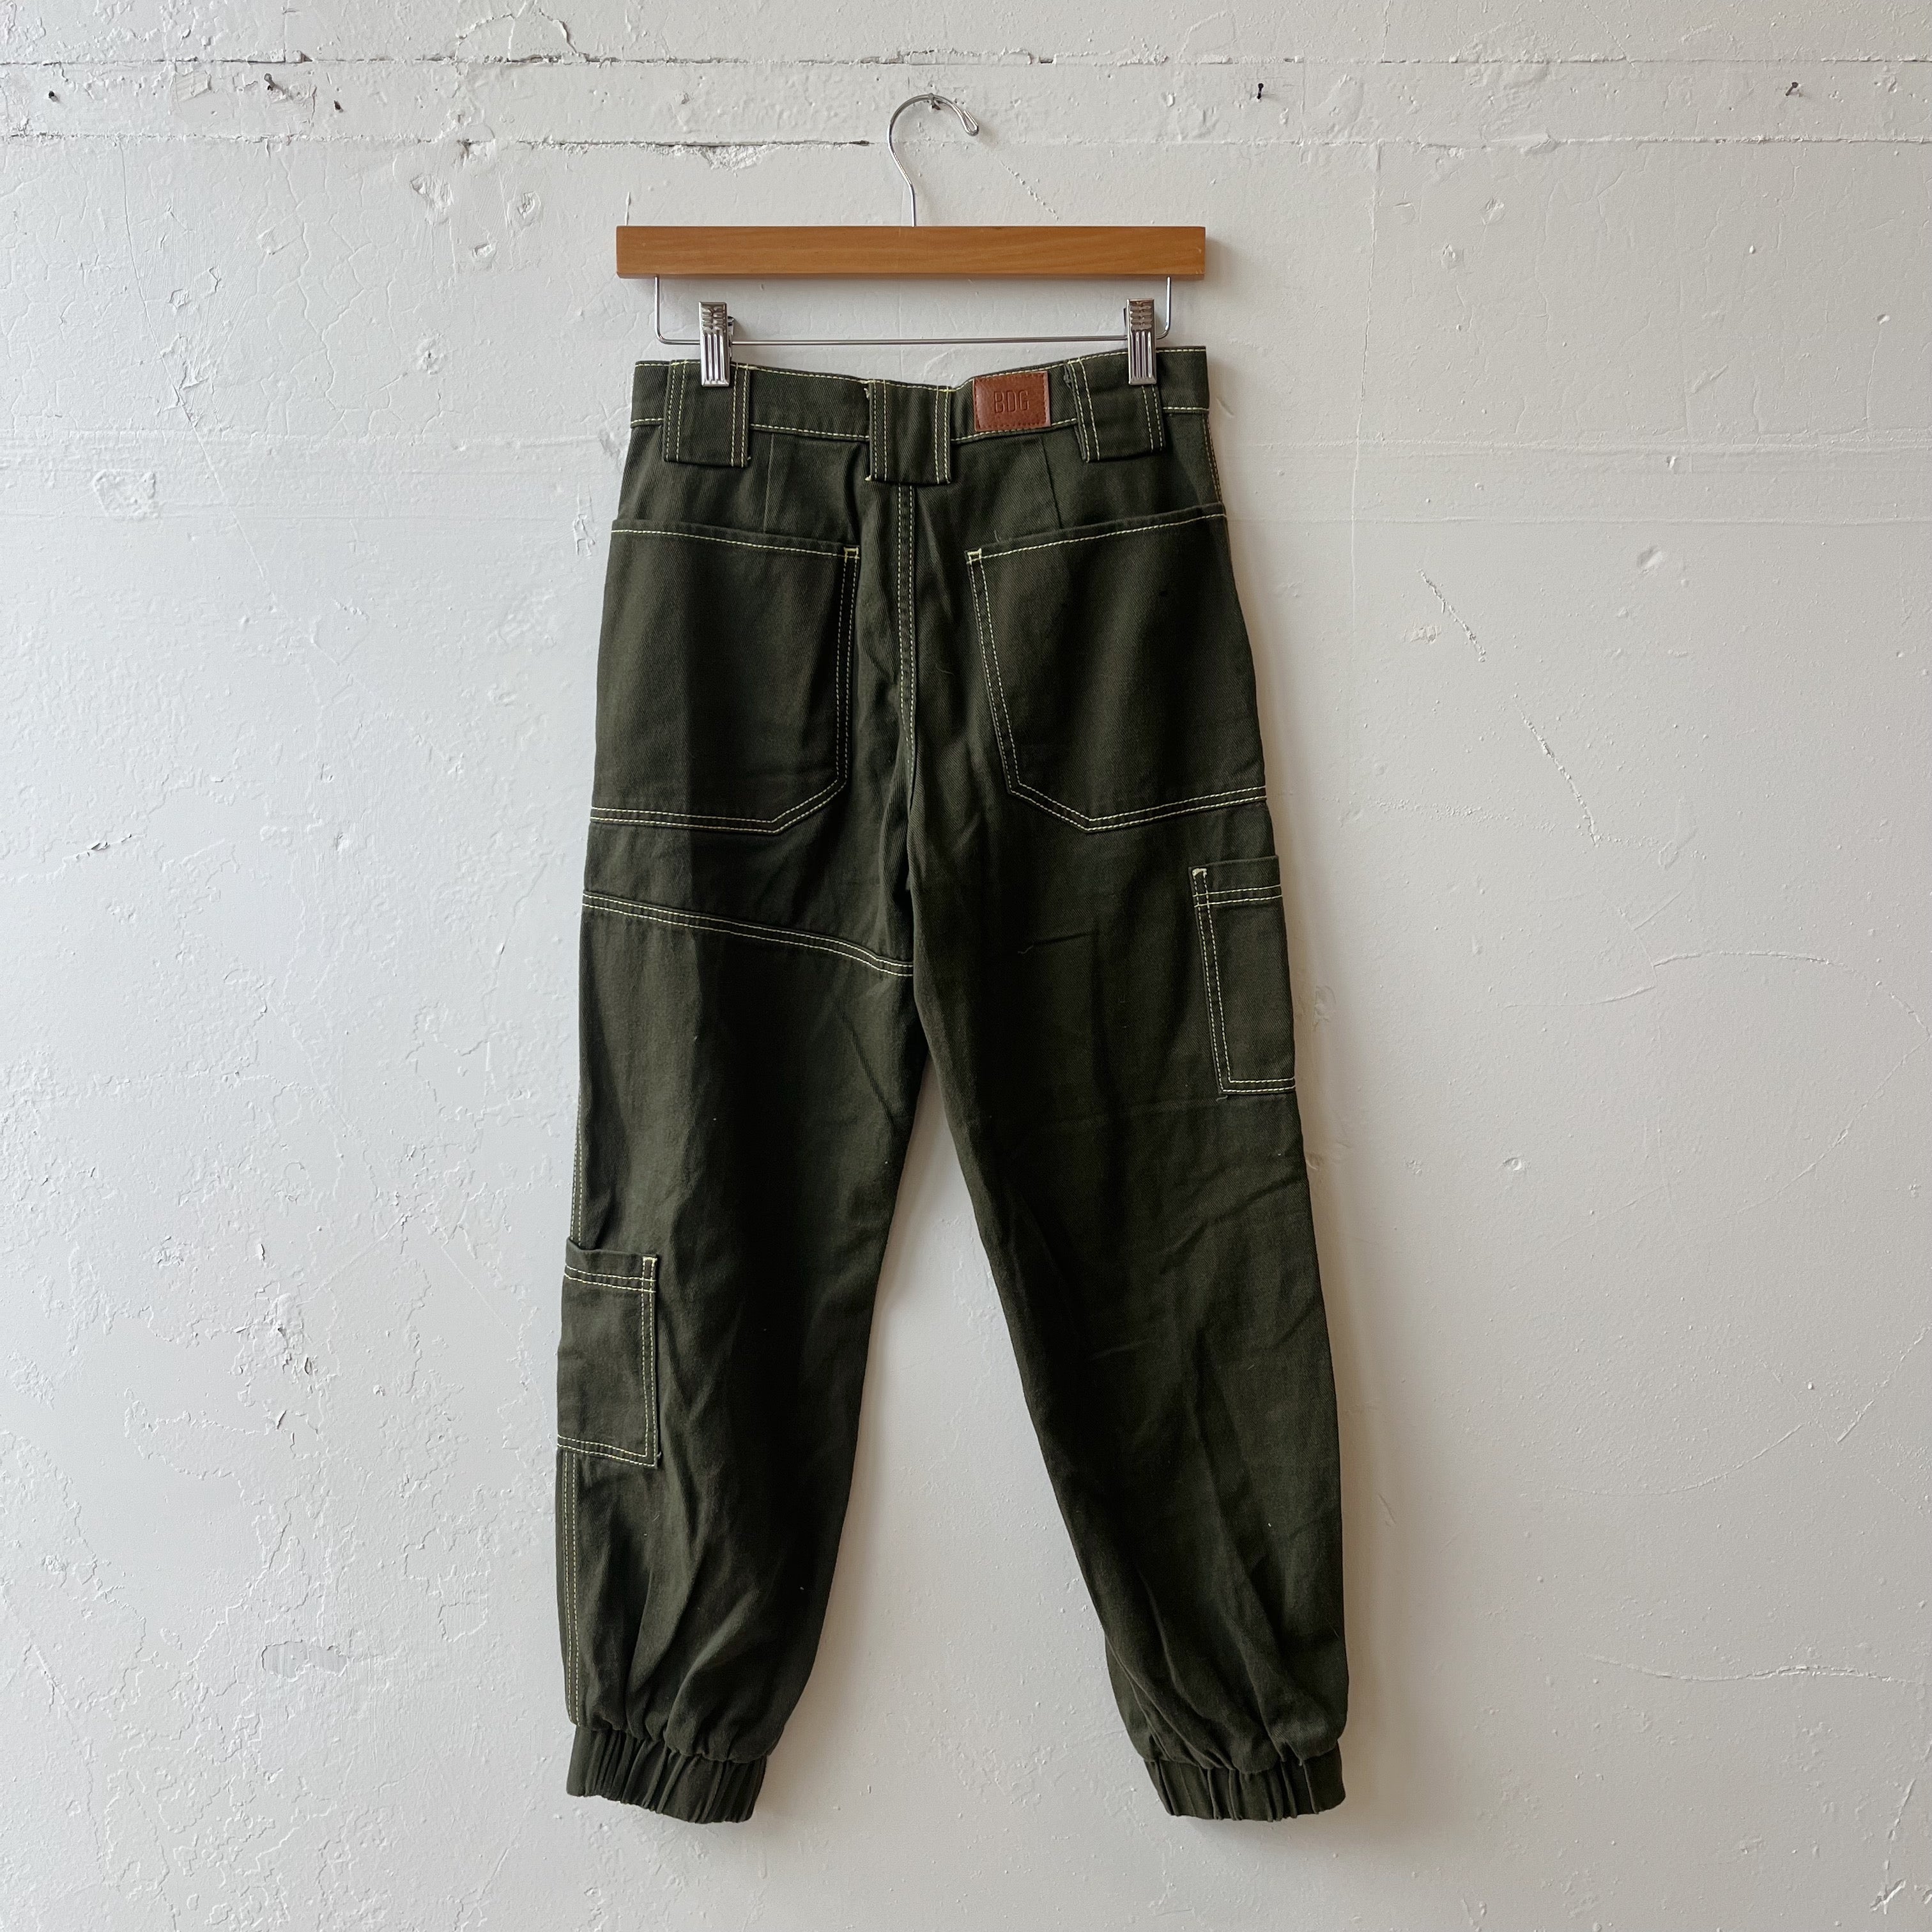 Size 0/25 | BDG Green Joggers